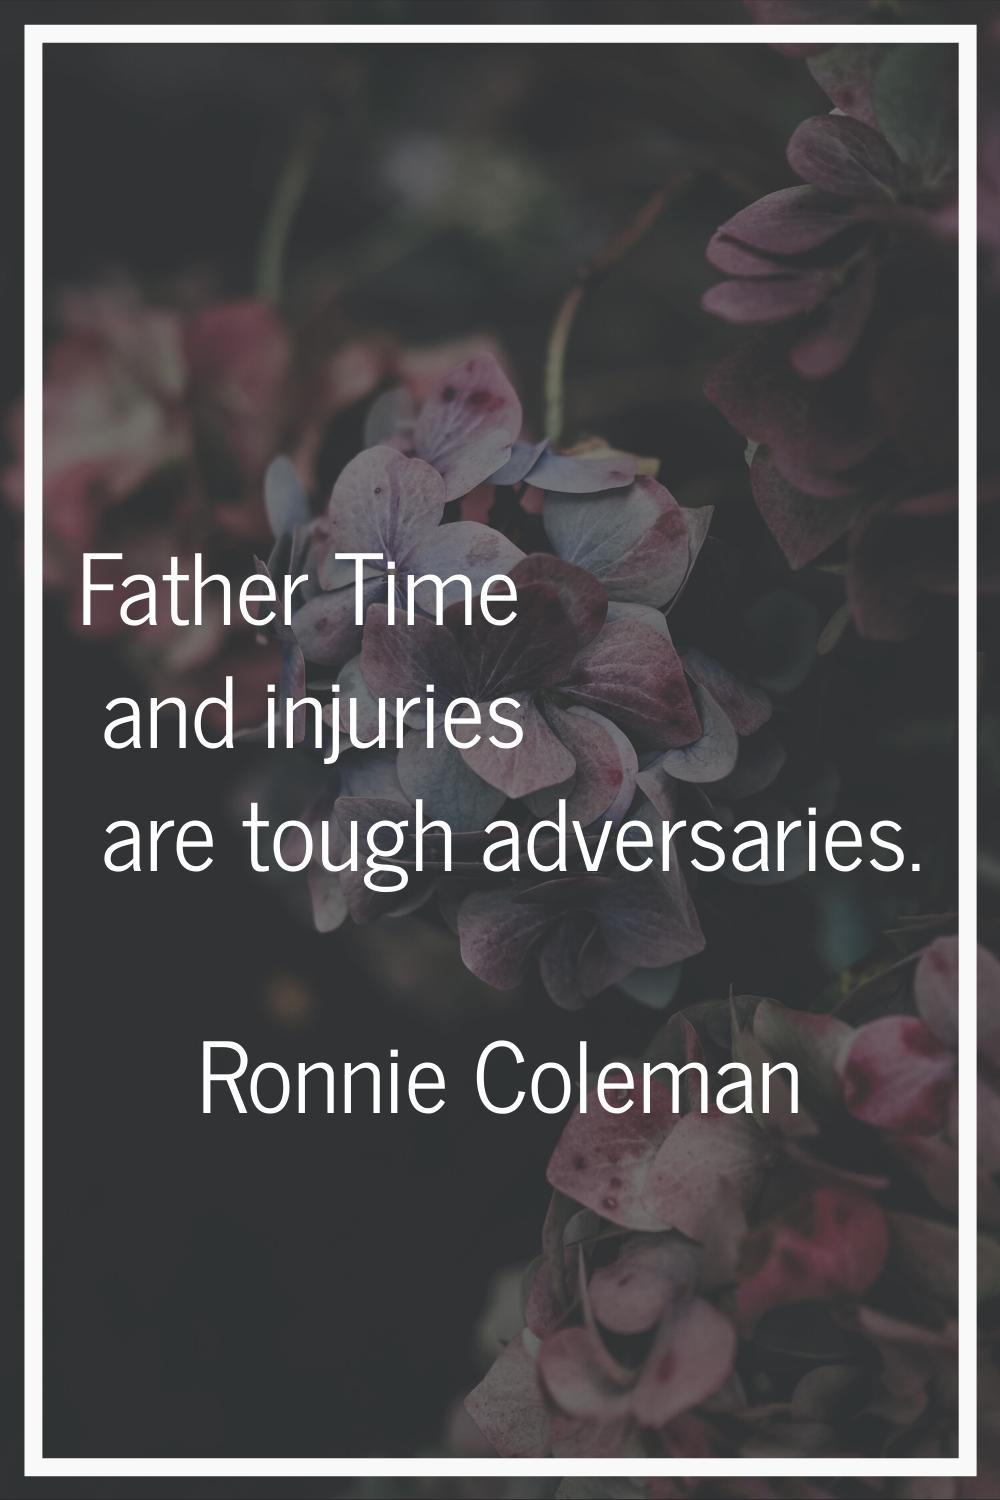 Father Time and injuries are tough adversaries.